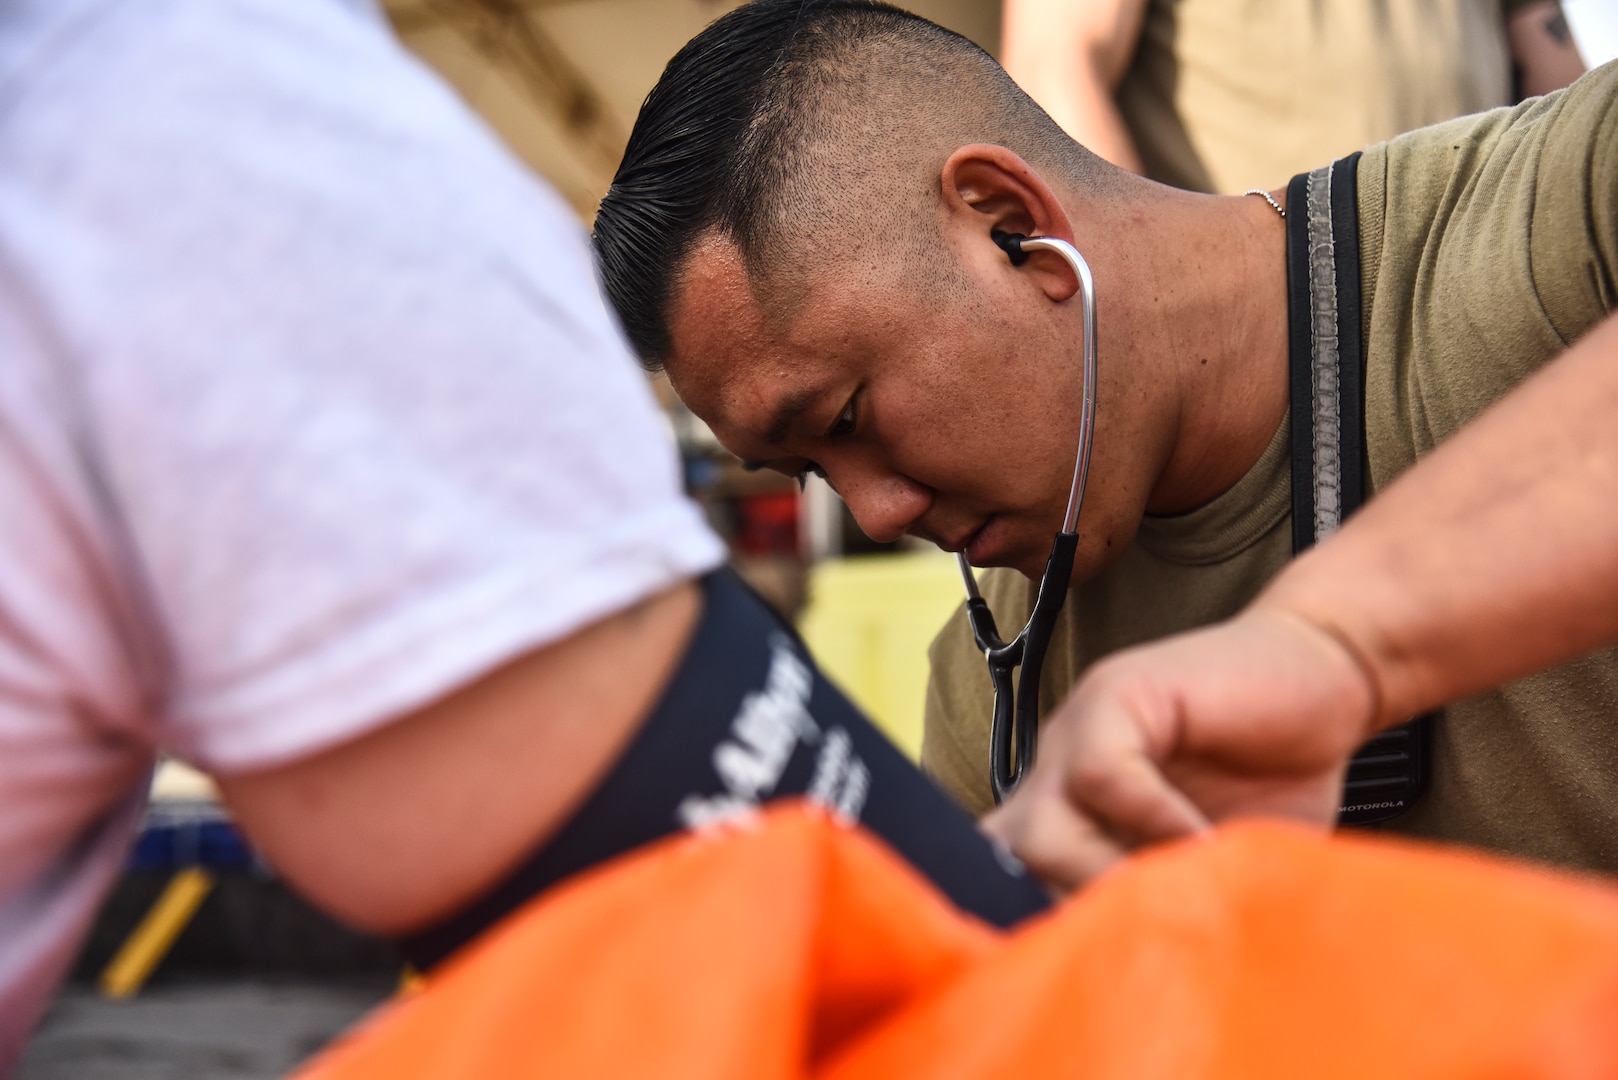 U.S. Air Force Senior Airman Peter Yoon, 380th Expeditionary Civil Engineer Squadron Fire Department firefighter, checks an Airman’s vitals during a hazardous materials exercise at Al Dhafra Air Base, United Arab Emirates, Jan. 4, 2019. The 380th ECES Fire Department and Emergency Management flights conducted a joint-agency hazardous material exercise for training purposes. (U.S. Air Force photo by Senior Airman Mya M. Crosby)